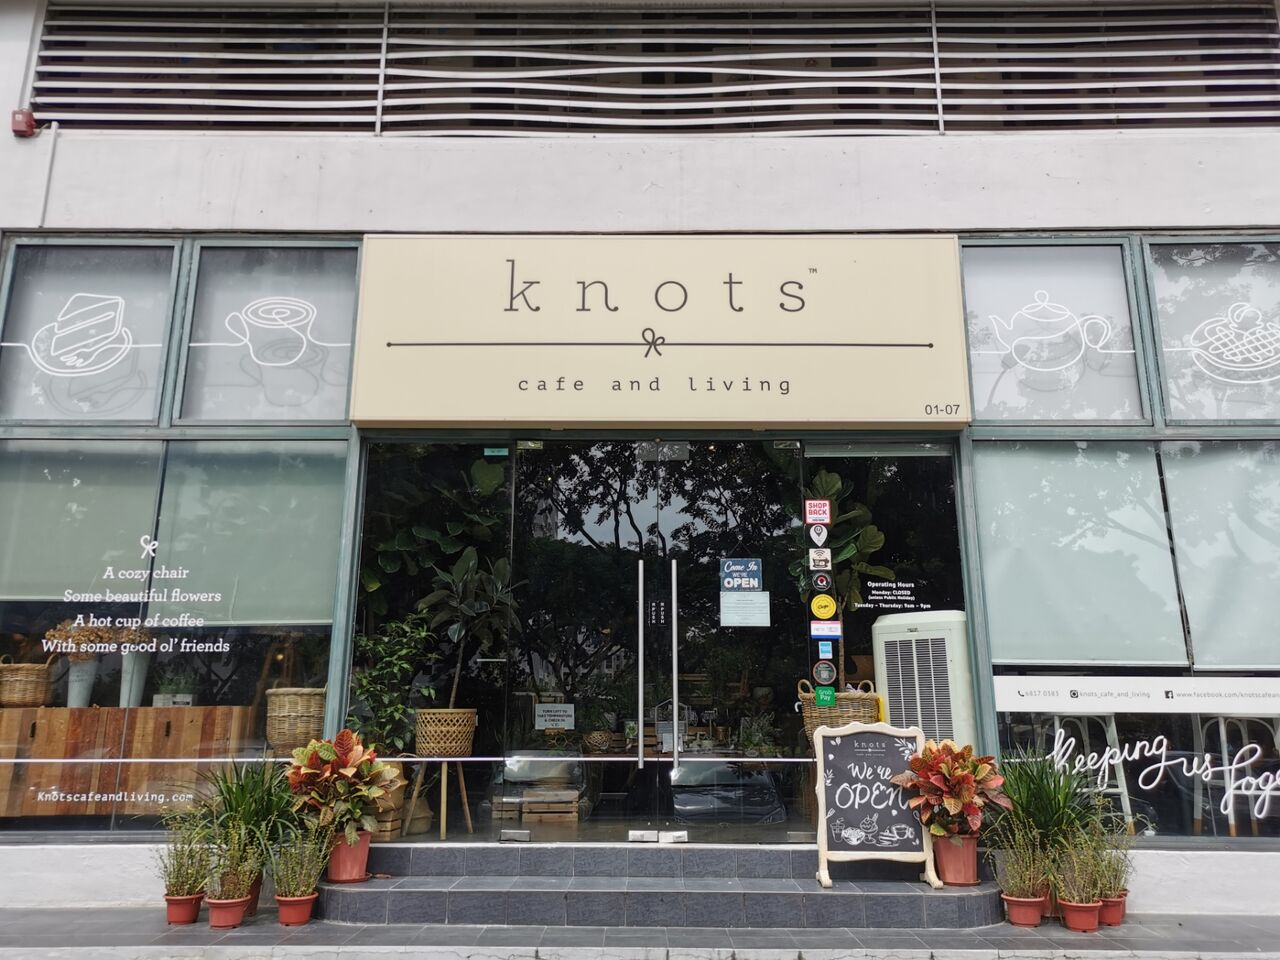 knots cafe and living カフェ シンガポール